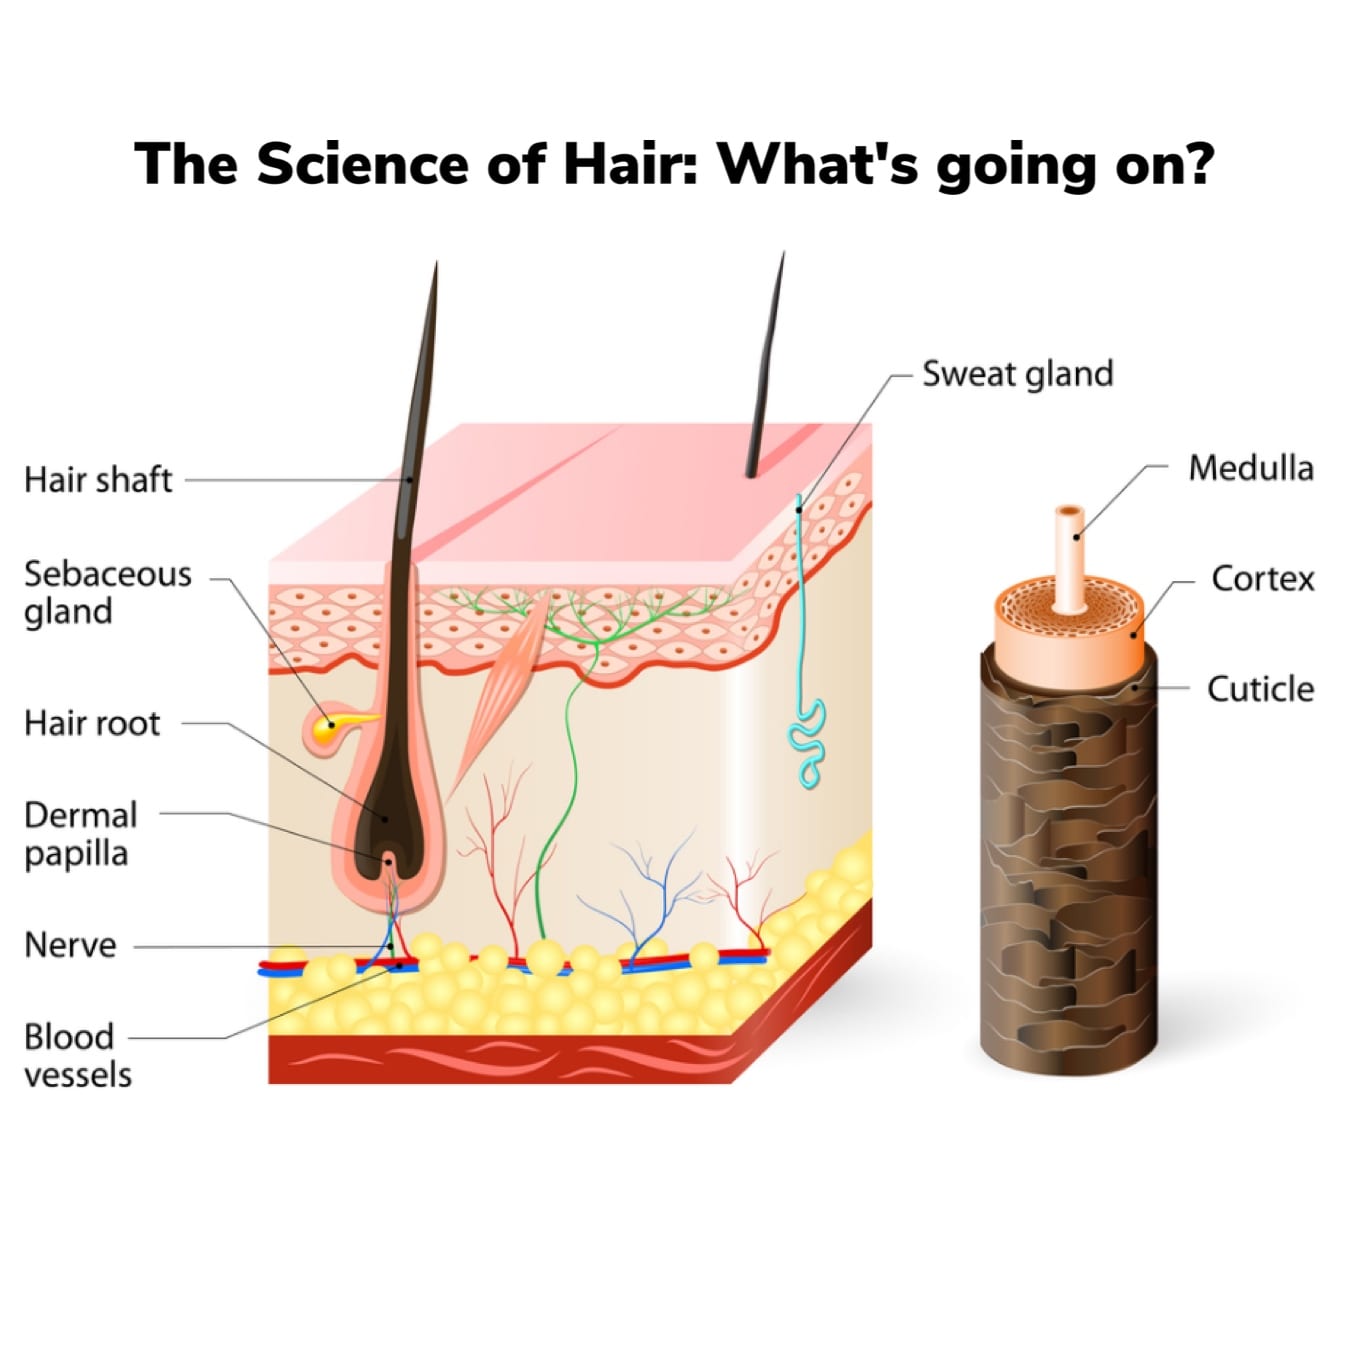 The Science of Hair: What's going on?